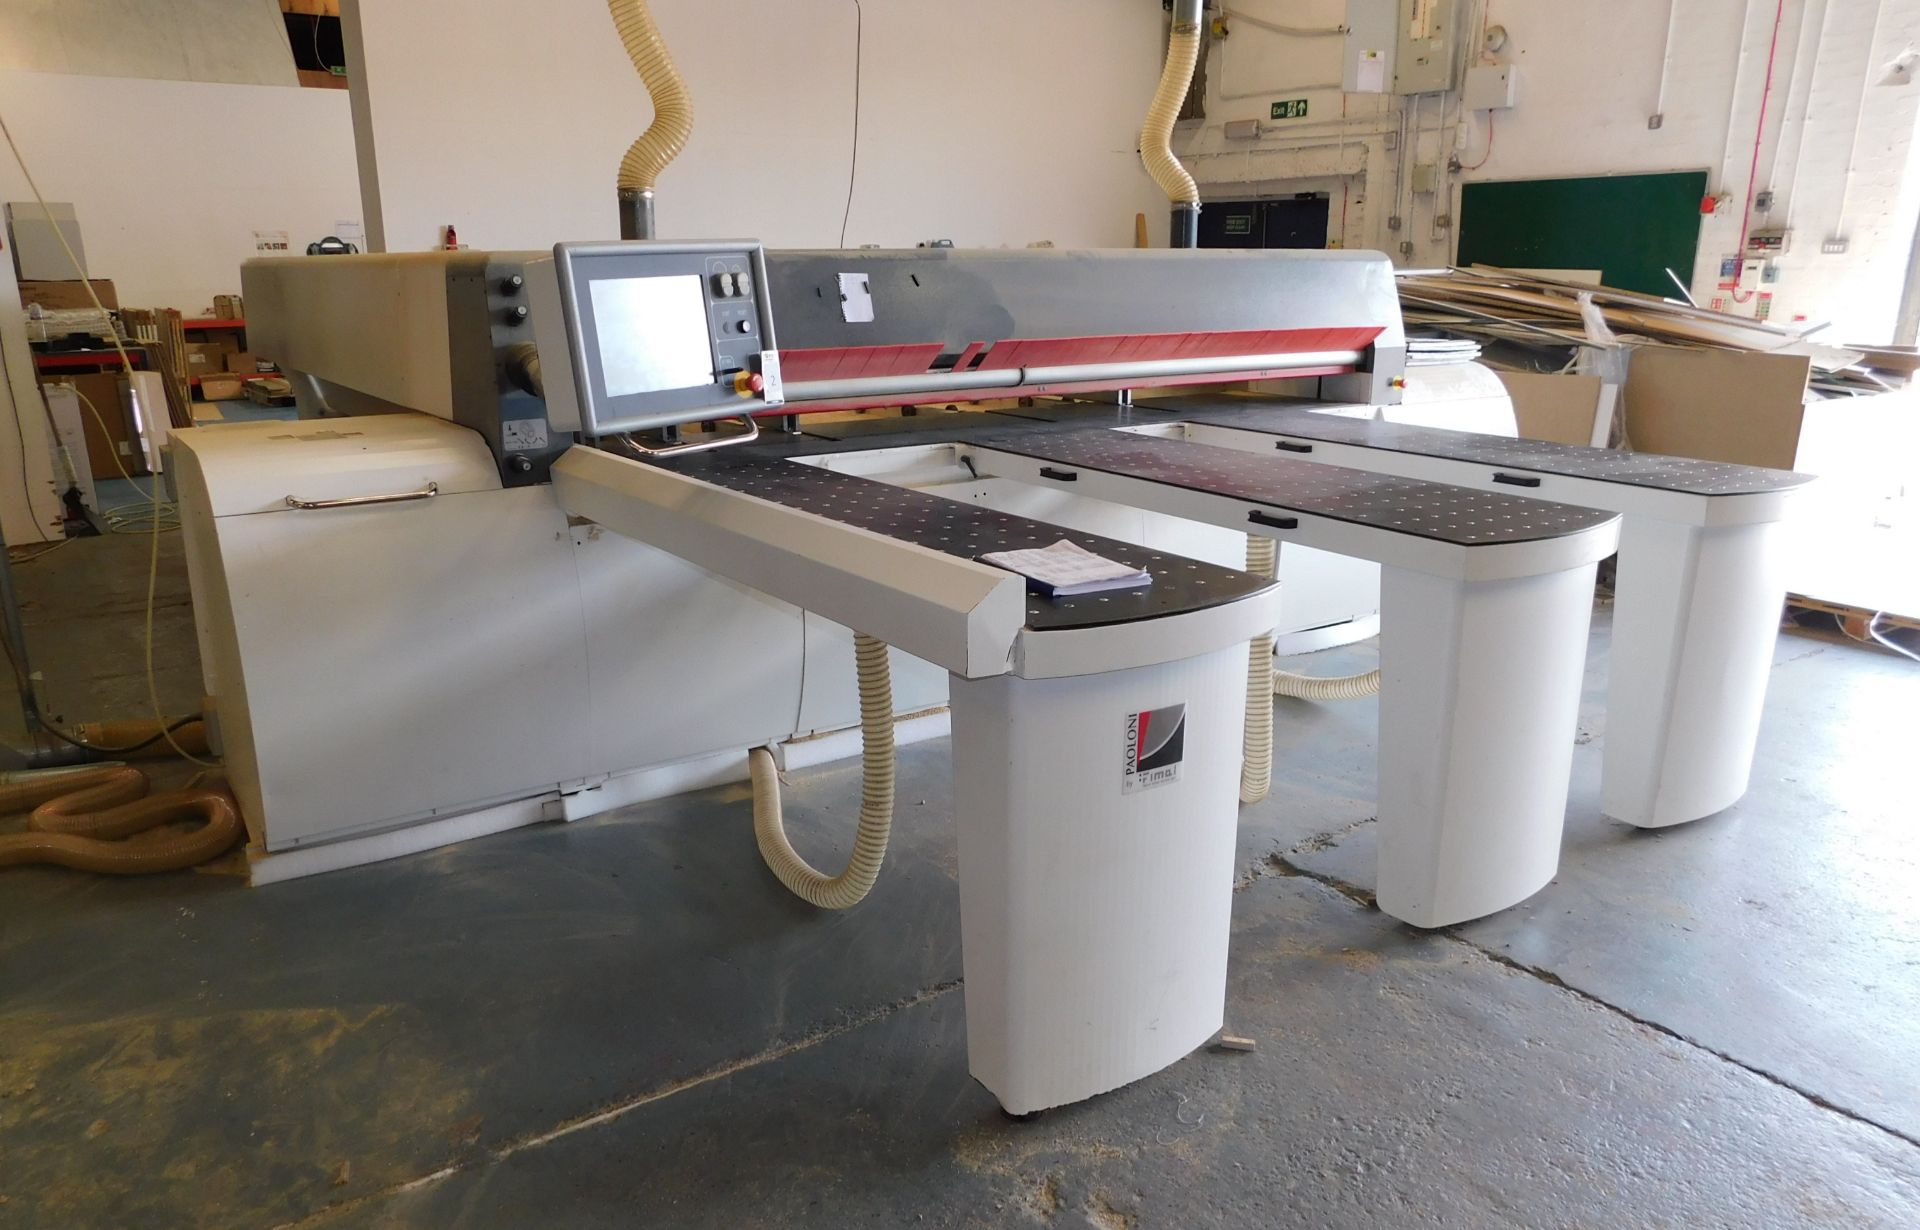 2015 Paoloni by Fimal KR32 CNC Beam Saw, 3-Phase, Serial Number: 1227 (Location Walsall. Please - Image 3 of 11